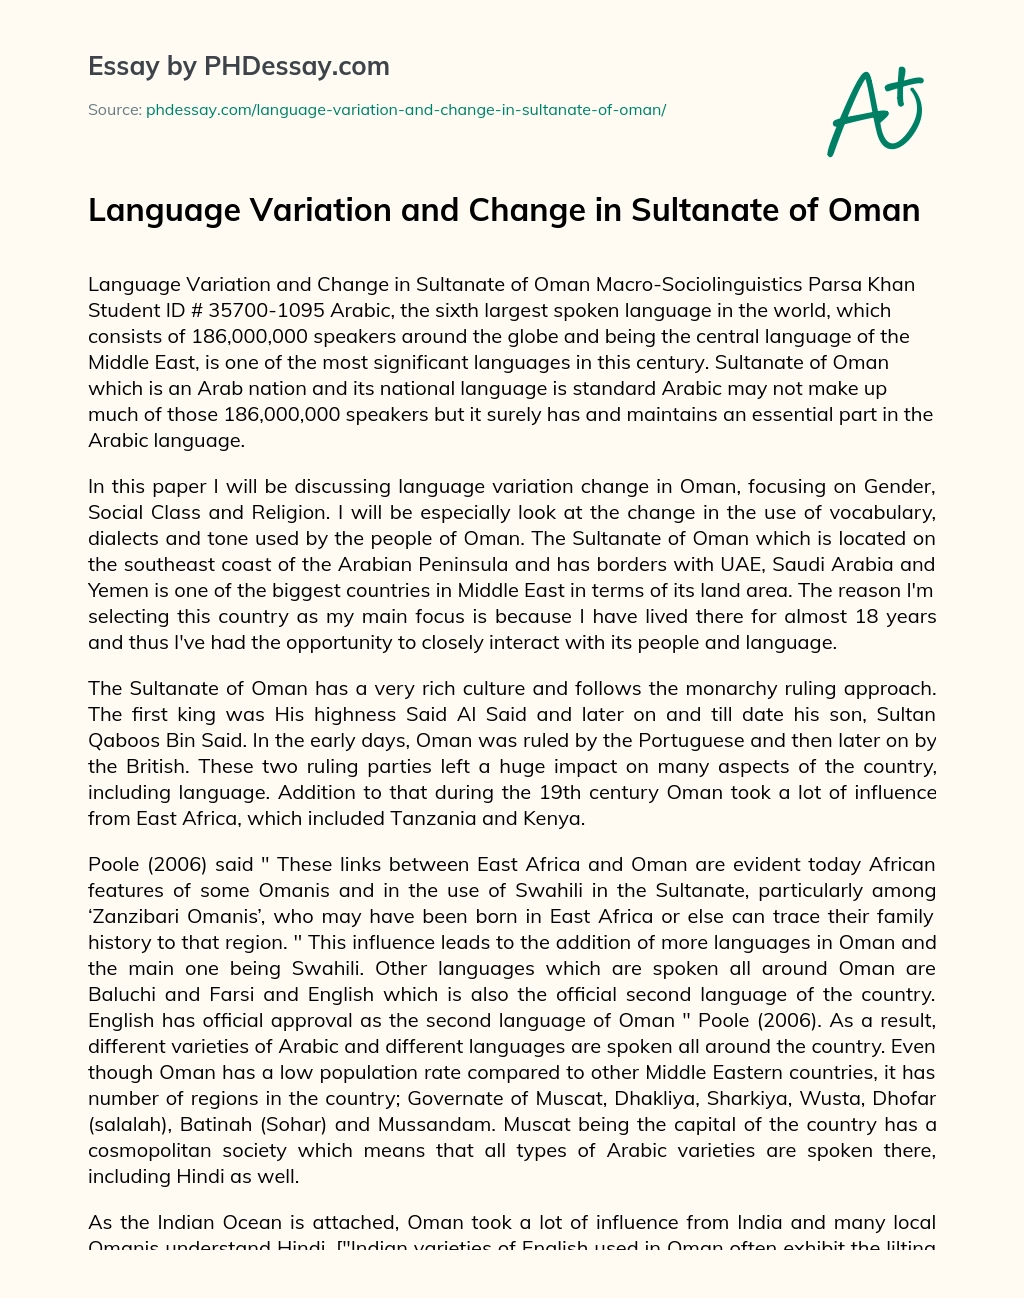 Language Variation and Change in Sultanate of Oman essay